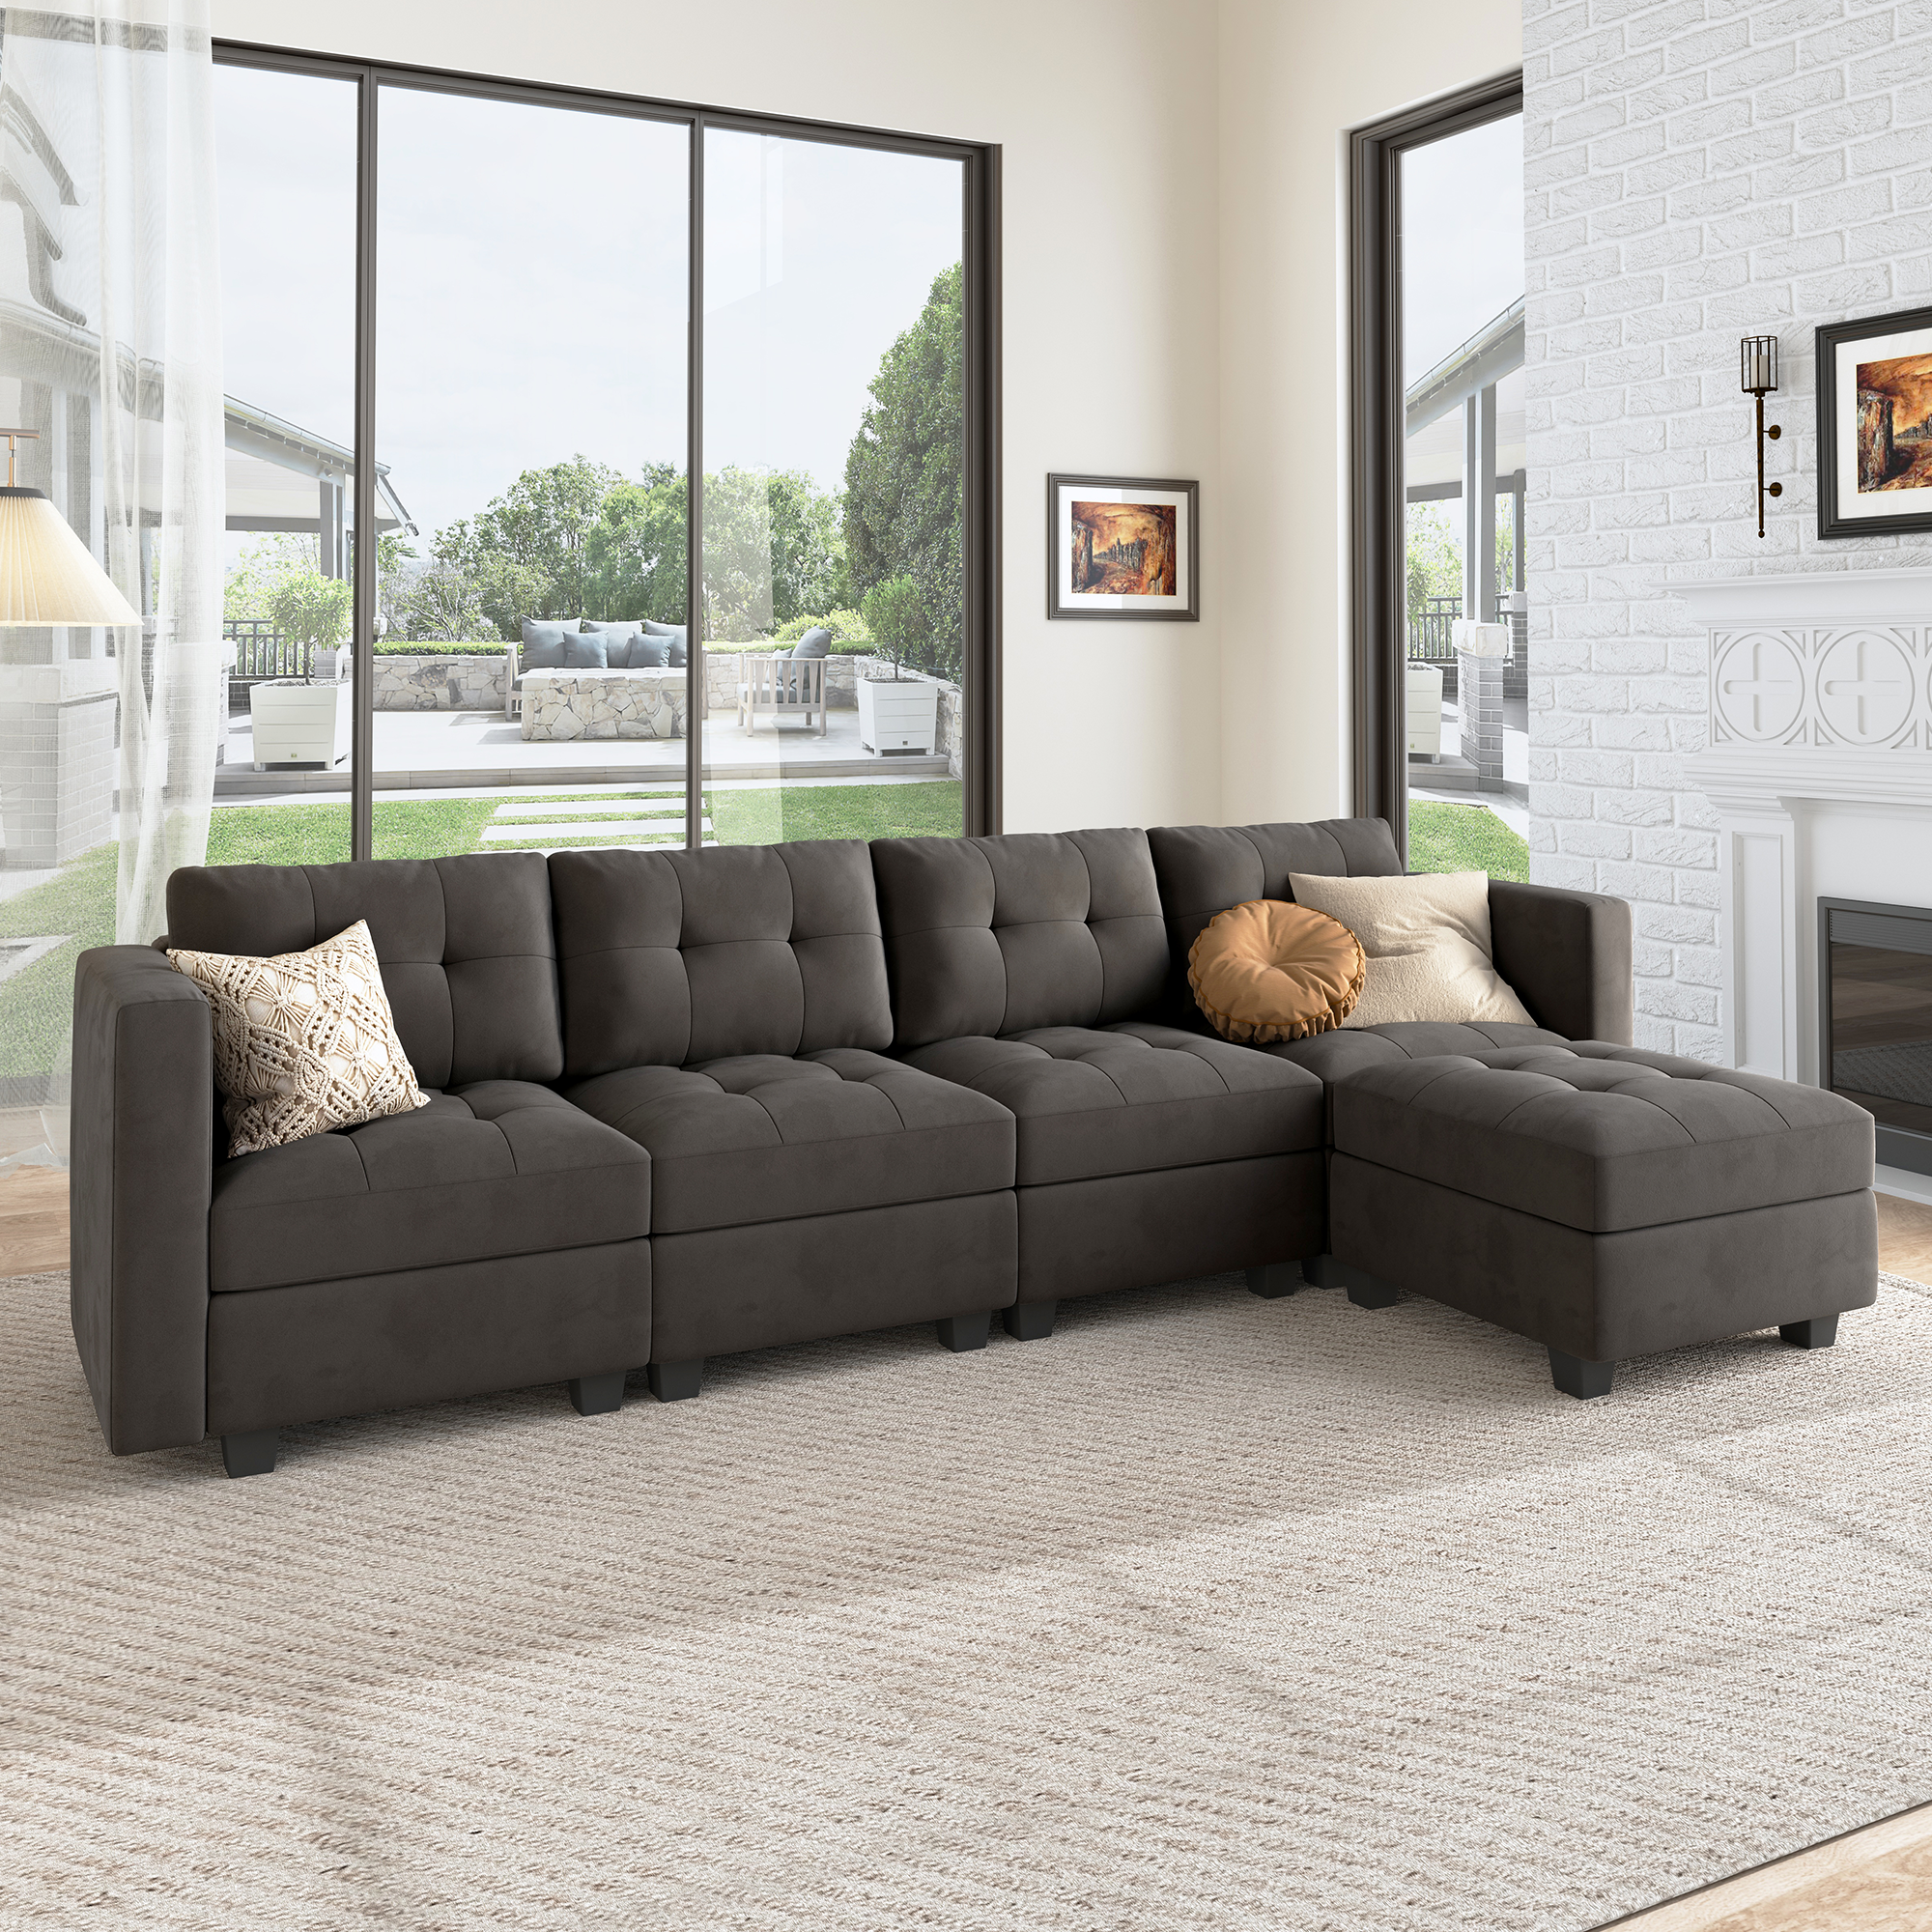 HONBAY Tufted Modular Sofa 4-Seat+1-Side Armrest+1-Ottoman with Storage Seater